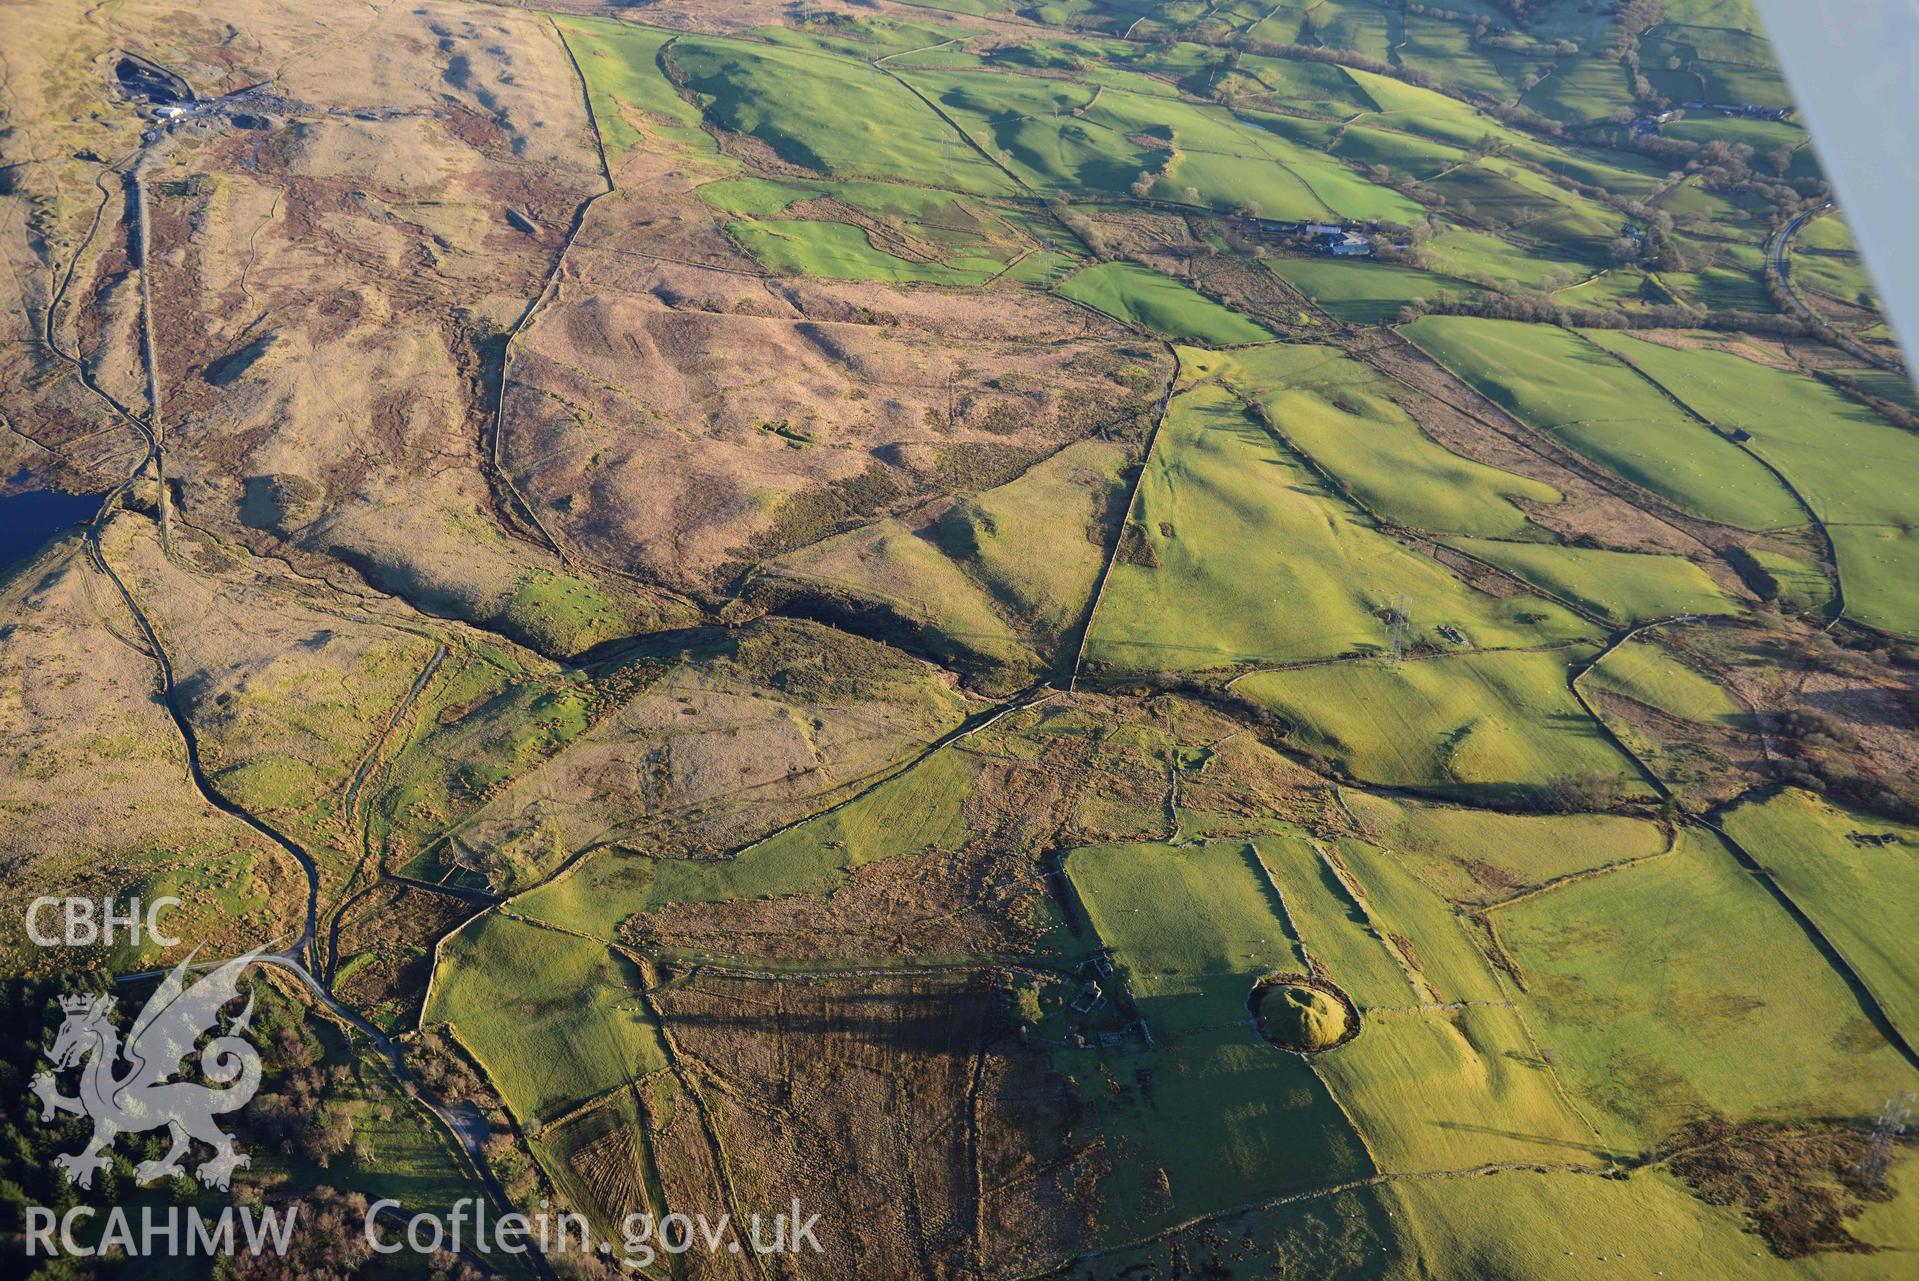 Oblique aerial photograph of Tomen y Mur Roman fort and earthwork complex. Taken during the Royal Commission’s programme of archaeological aerial reconnaissance by Toby Driver on 17th January 2022